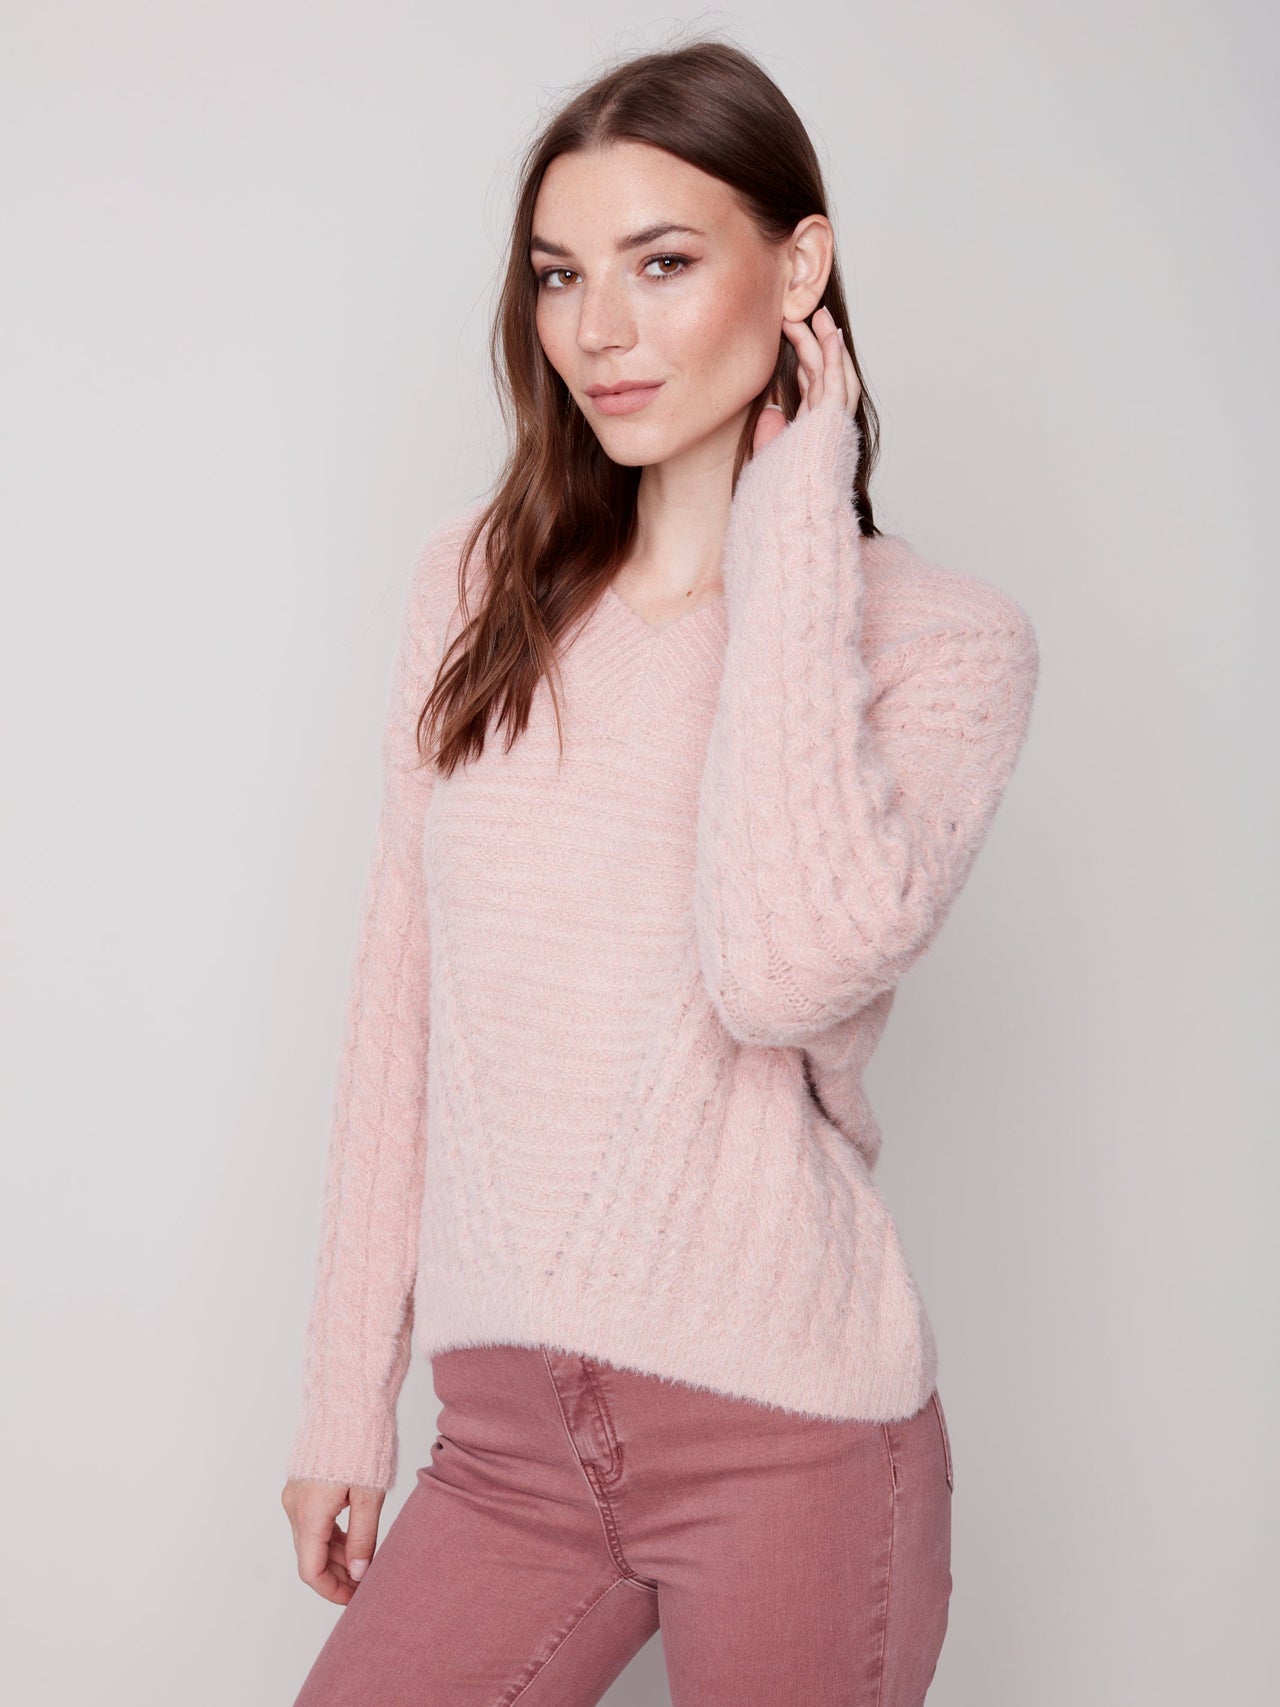 Powder Plush Knit Sweater by Charlie B Charlie B Casual Top